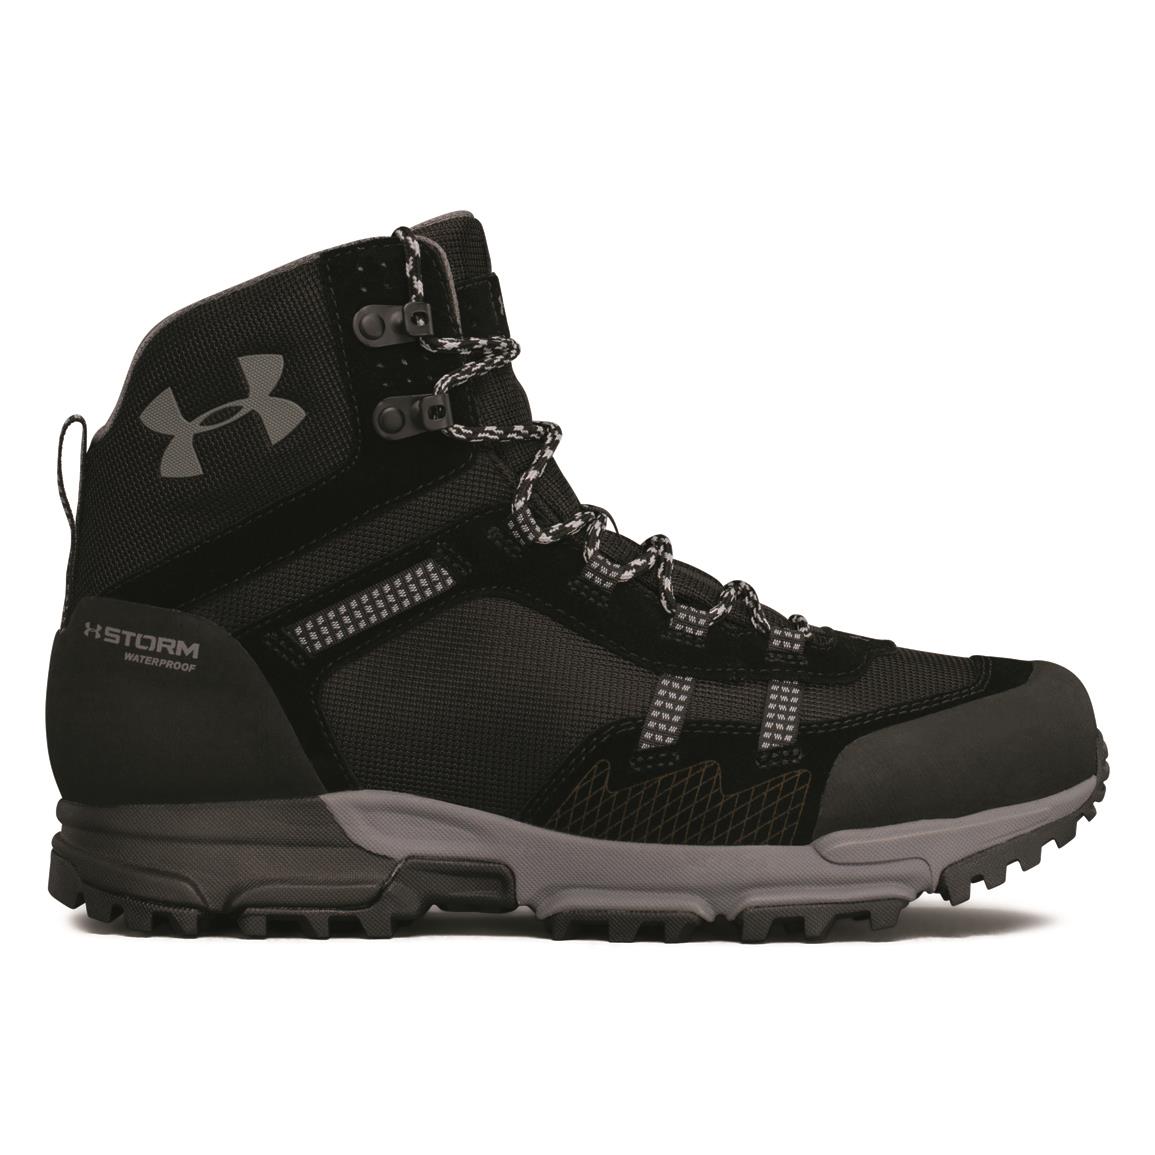 Cheap under armour storm shoes Buy 